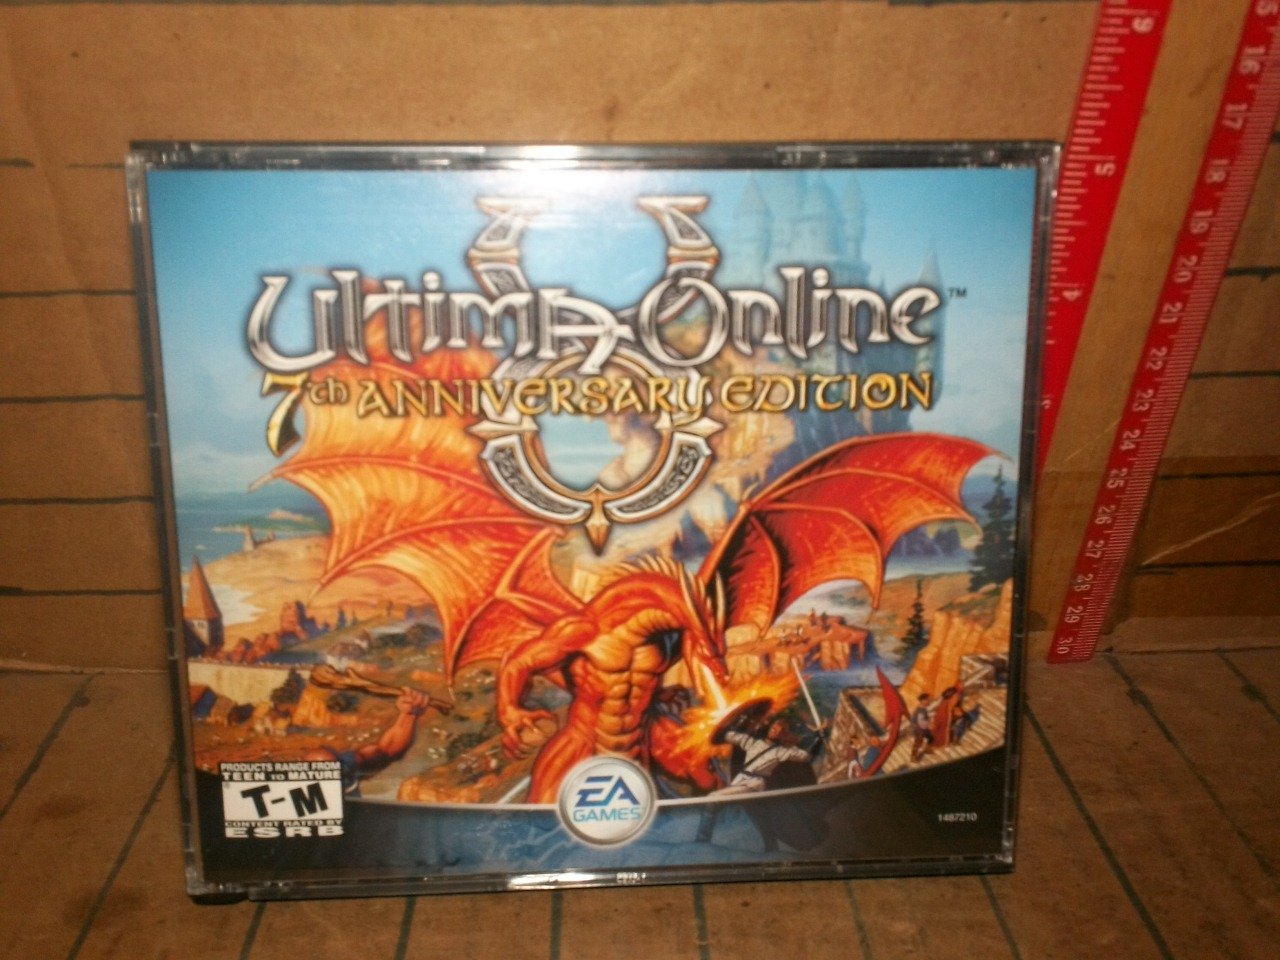 ultima-online 7th anniversary edition pc not tested like new disc